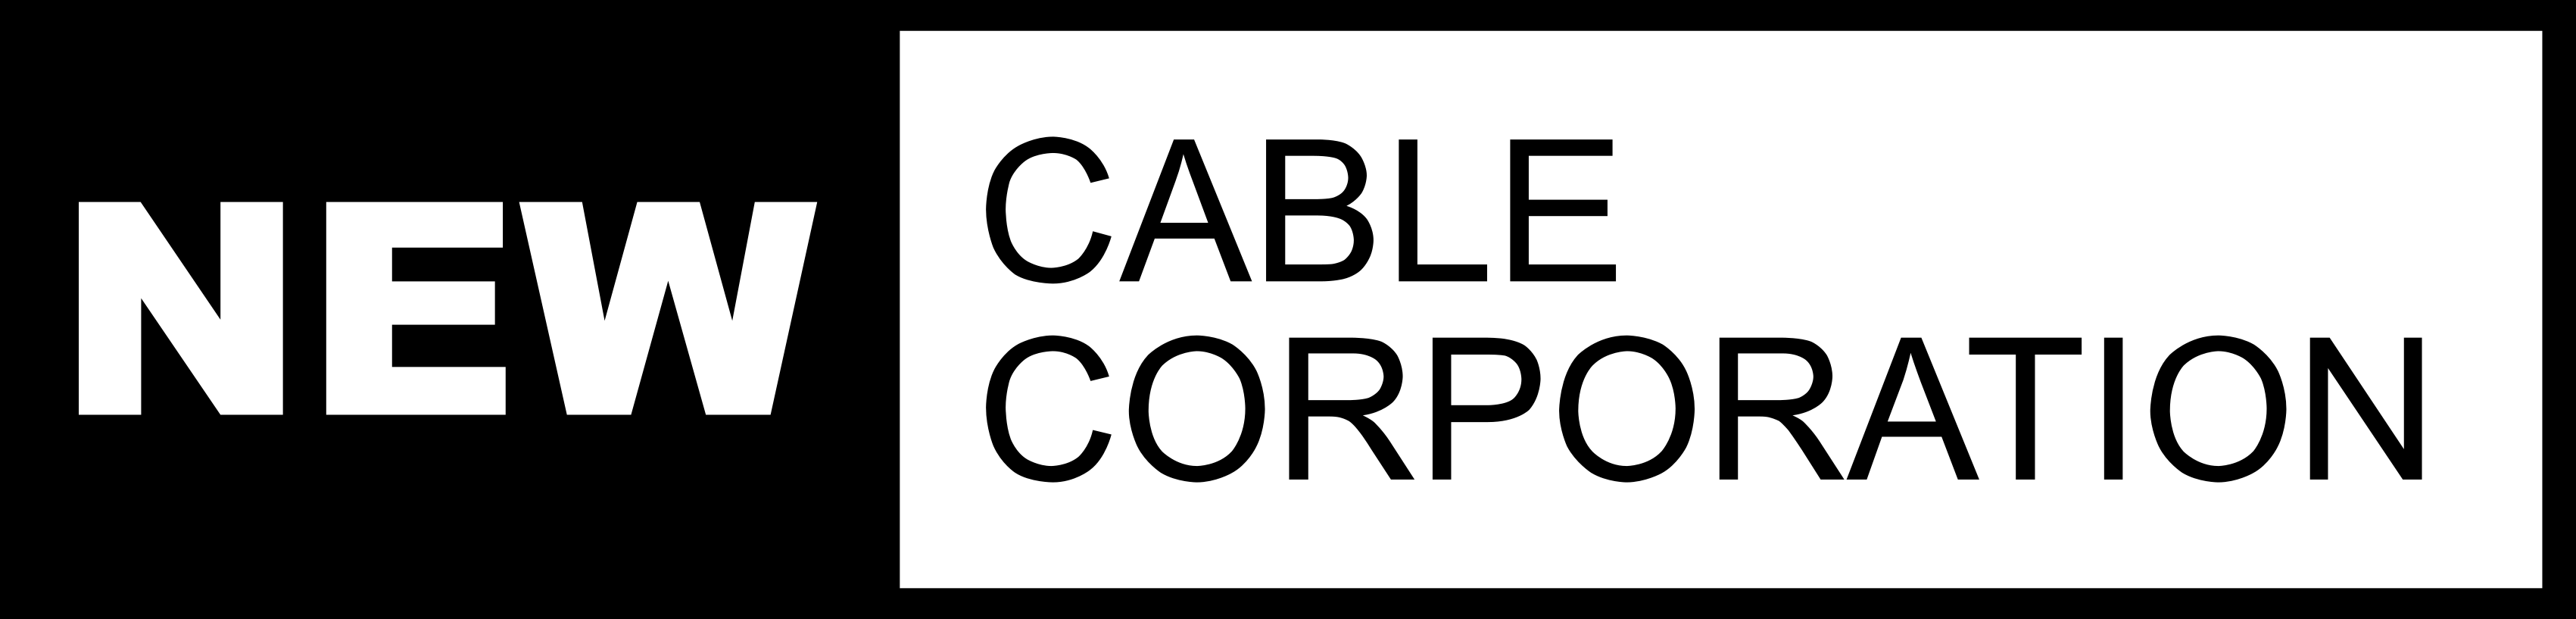 New Cable Corporation Oy